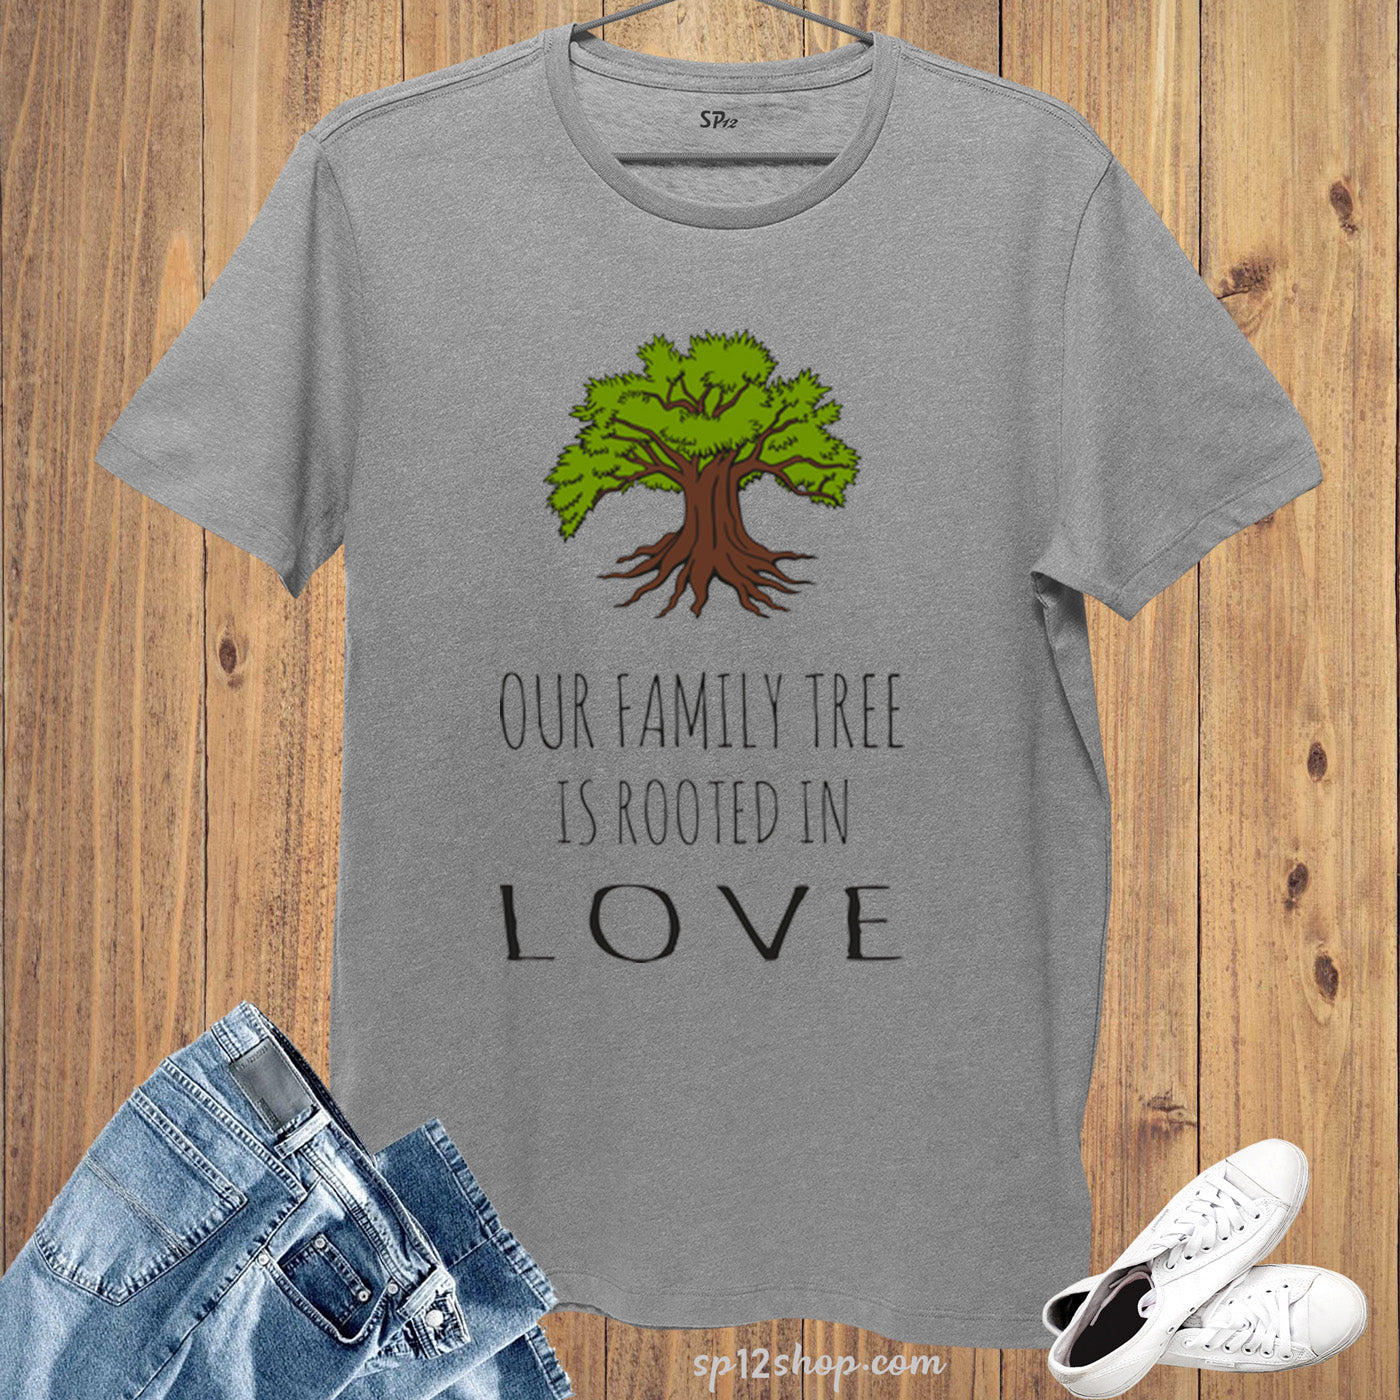 Our Family Tree is Rooted in Love T shirt